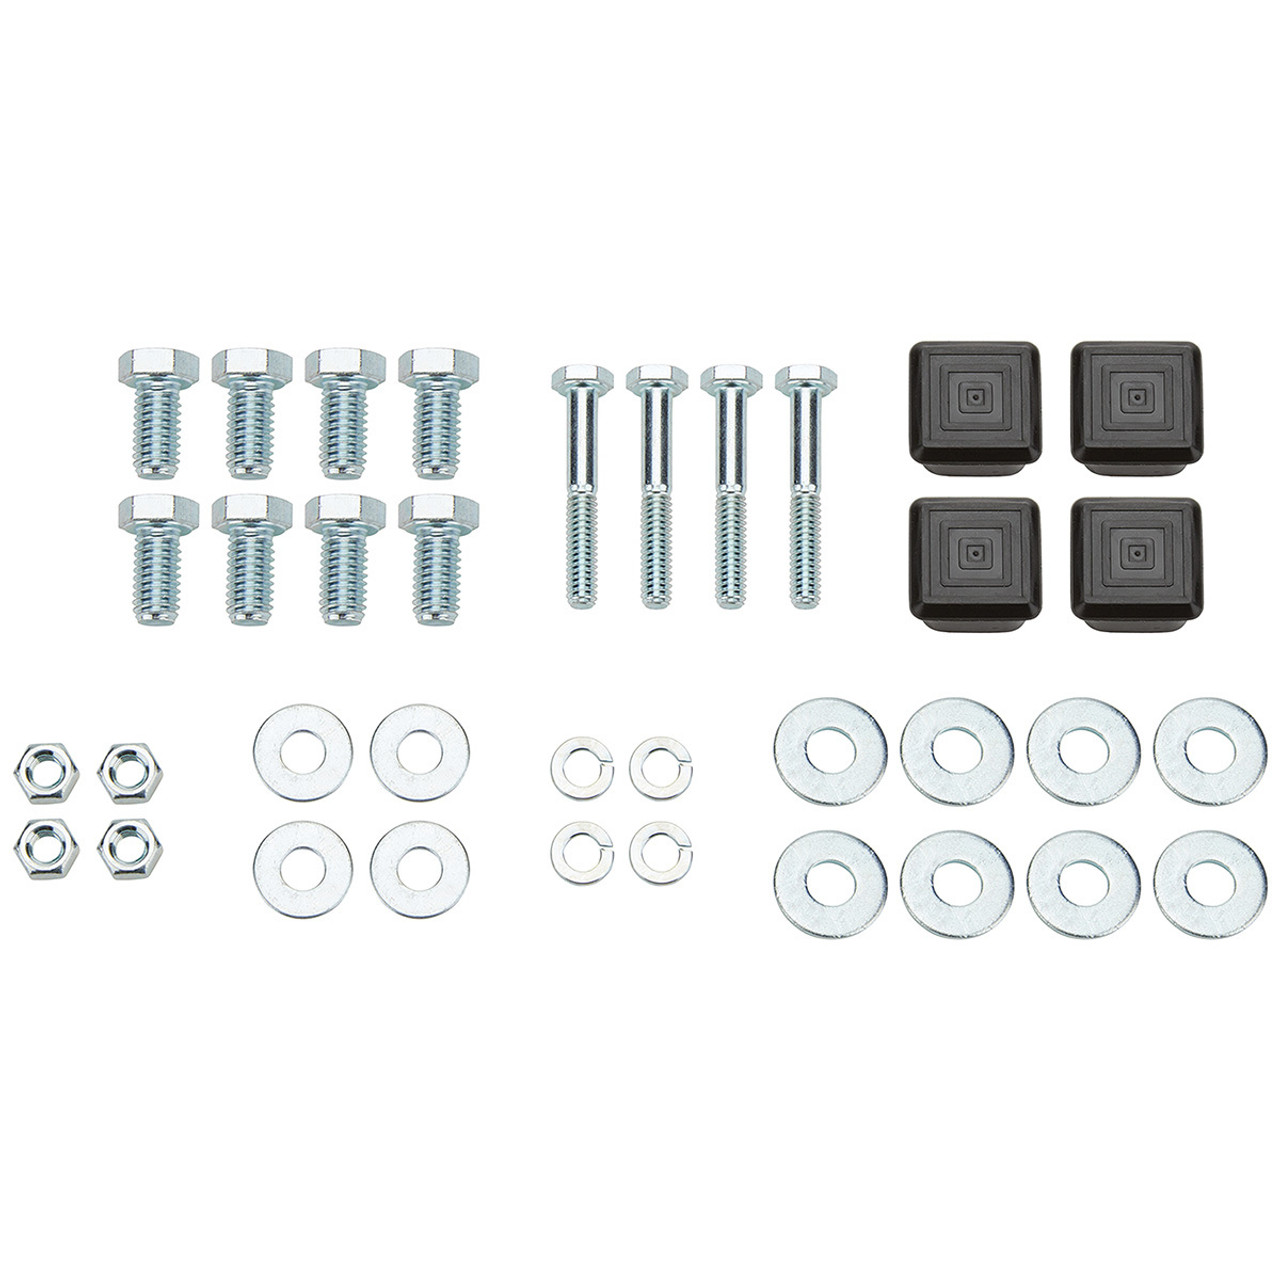 Hardware Kit for ALL10130 and ALL10132